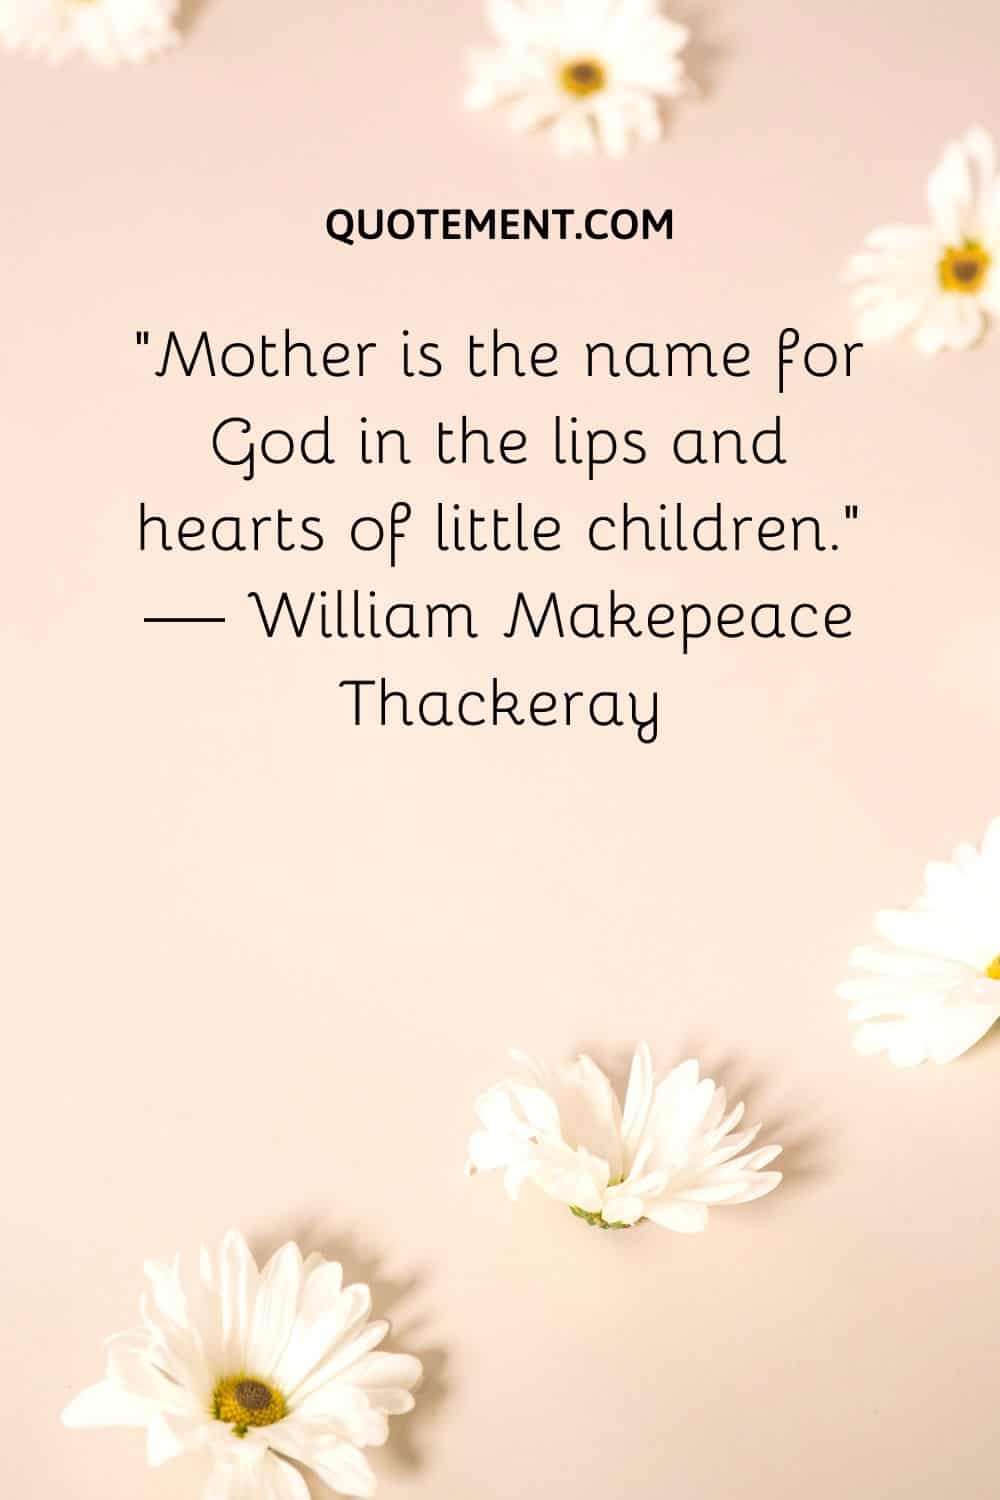 Mother is the name for God in the lips and hearts of little children